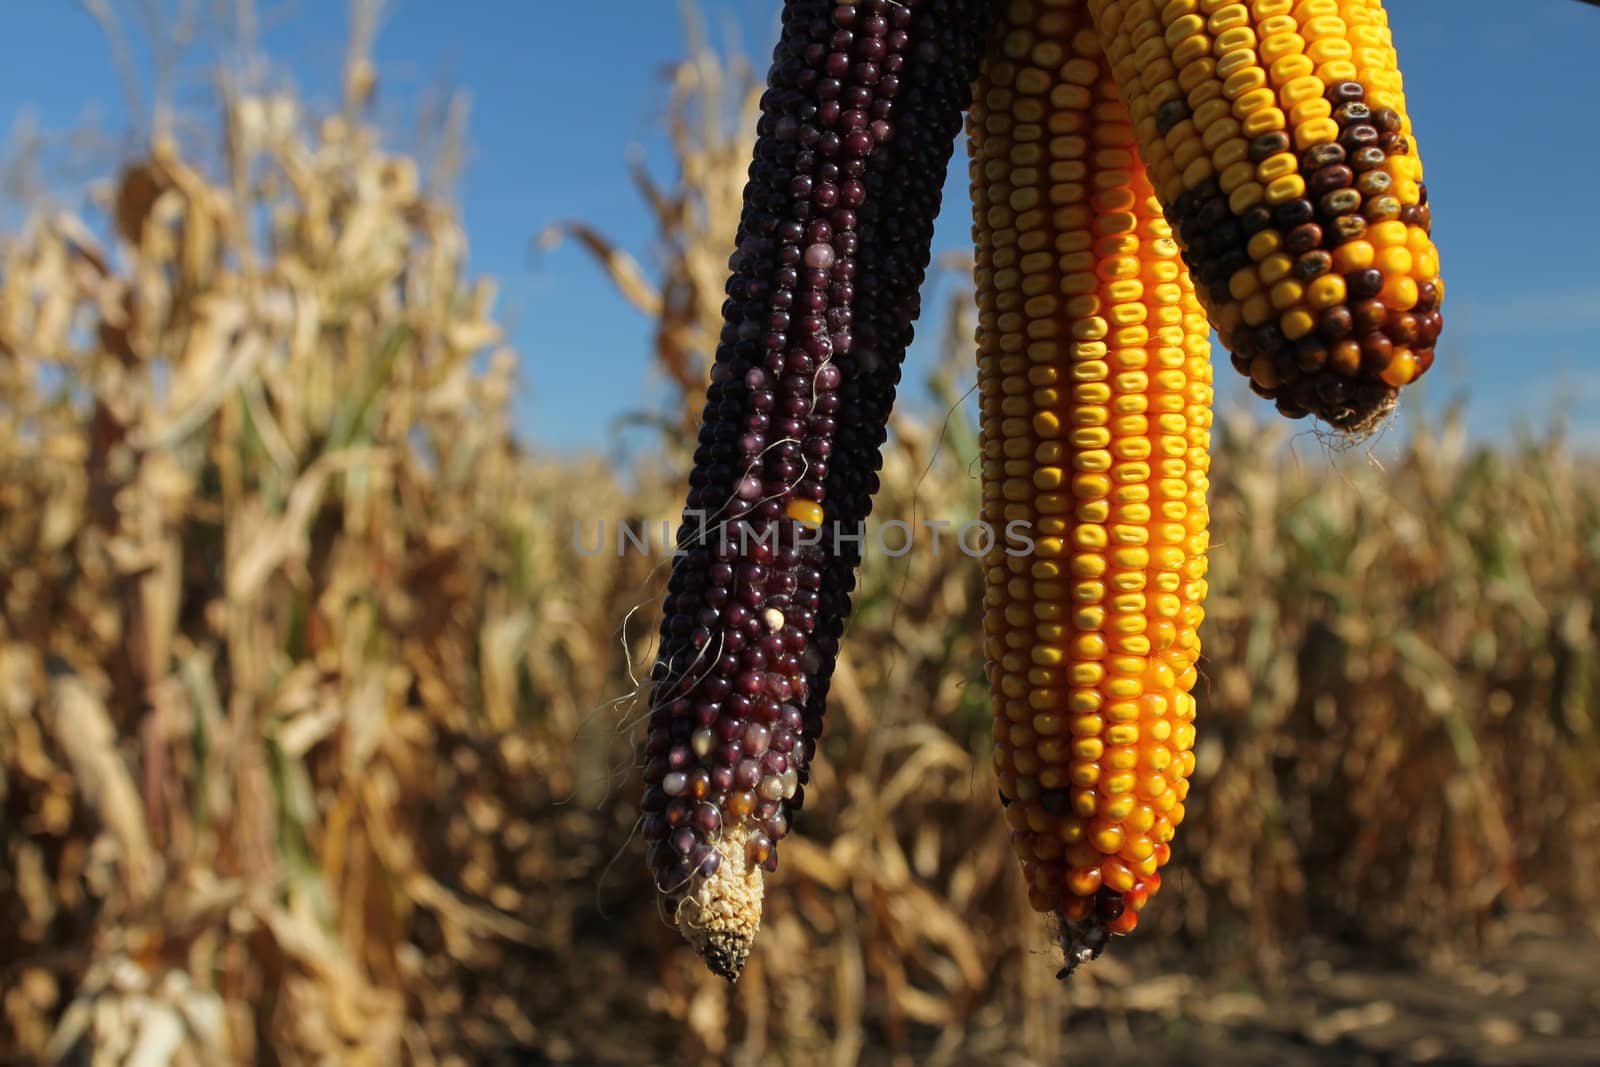 Yellow and red corncob in a corn field, early autumn

